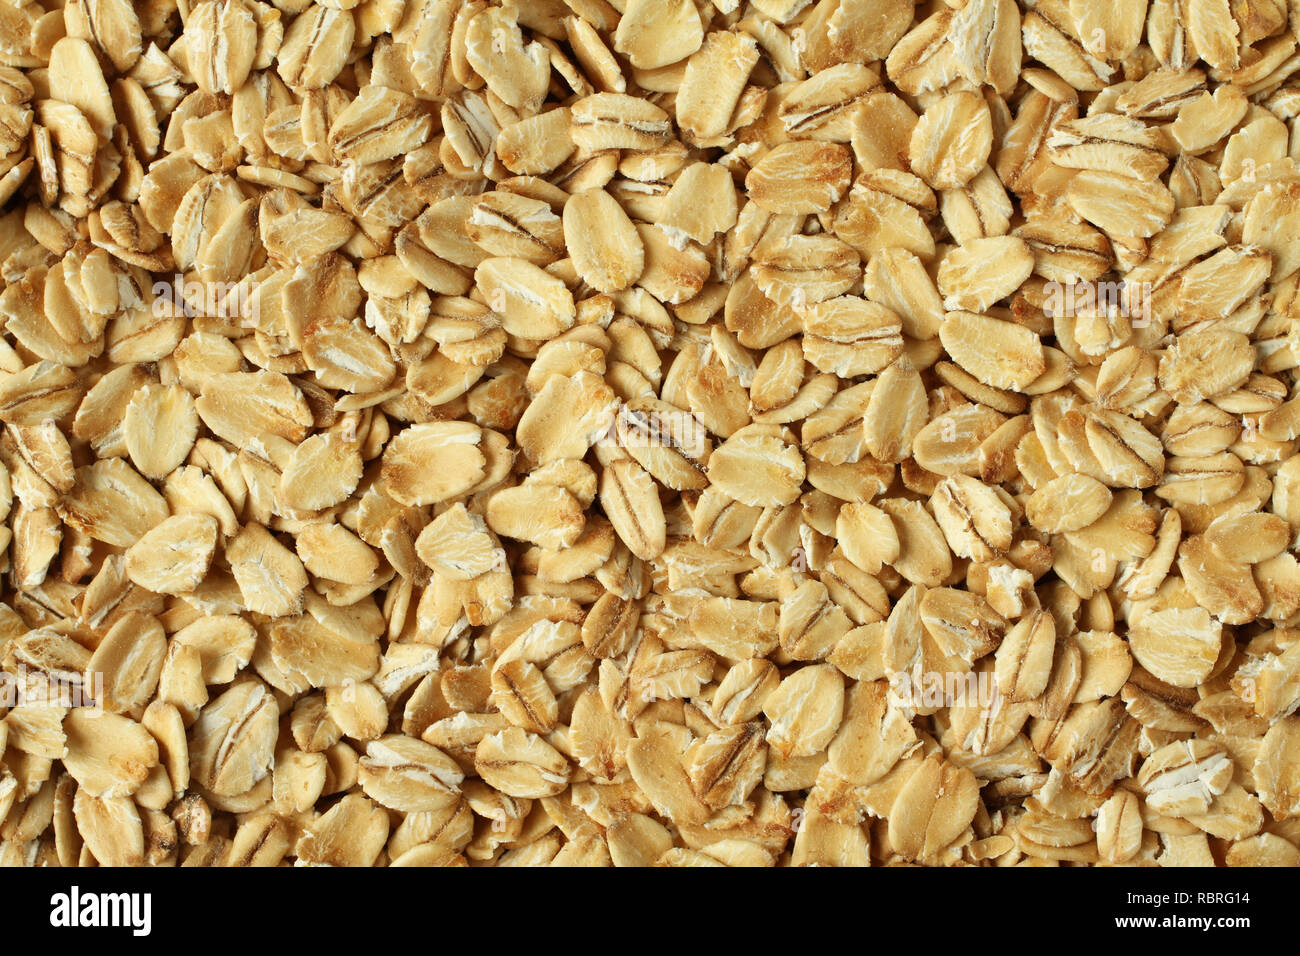 Food background - oat-flakes situated arbitrarily Stock Photo